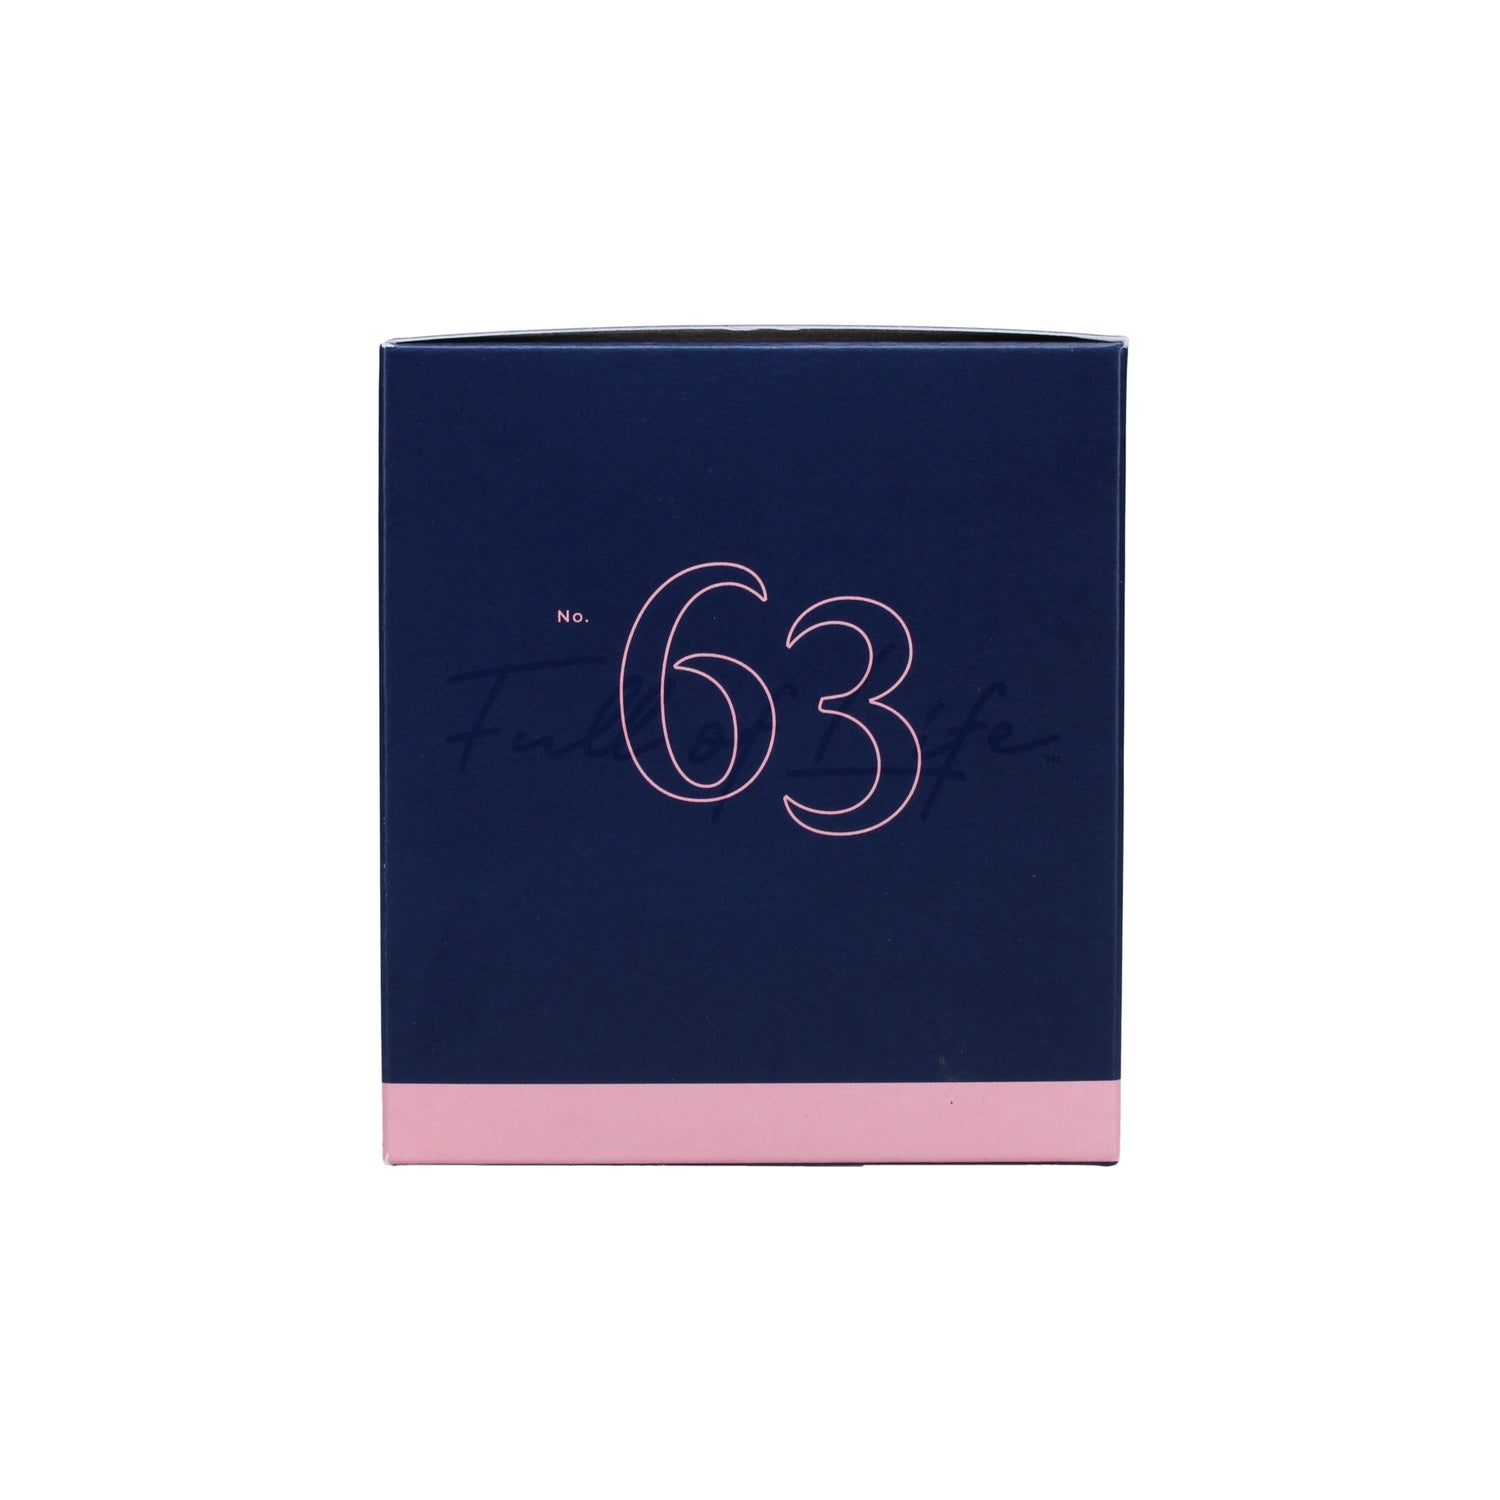 No. 63 Peony Rosewater 7 oz. Candle in Signature Box Image 6